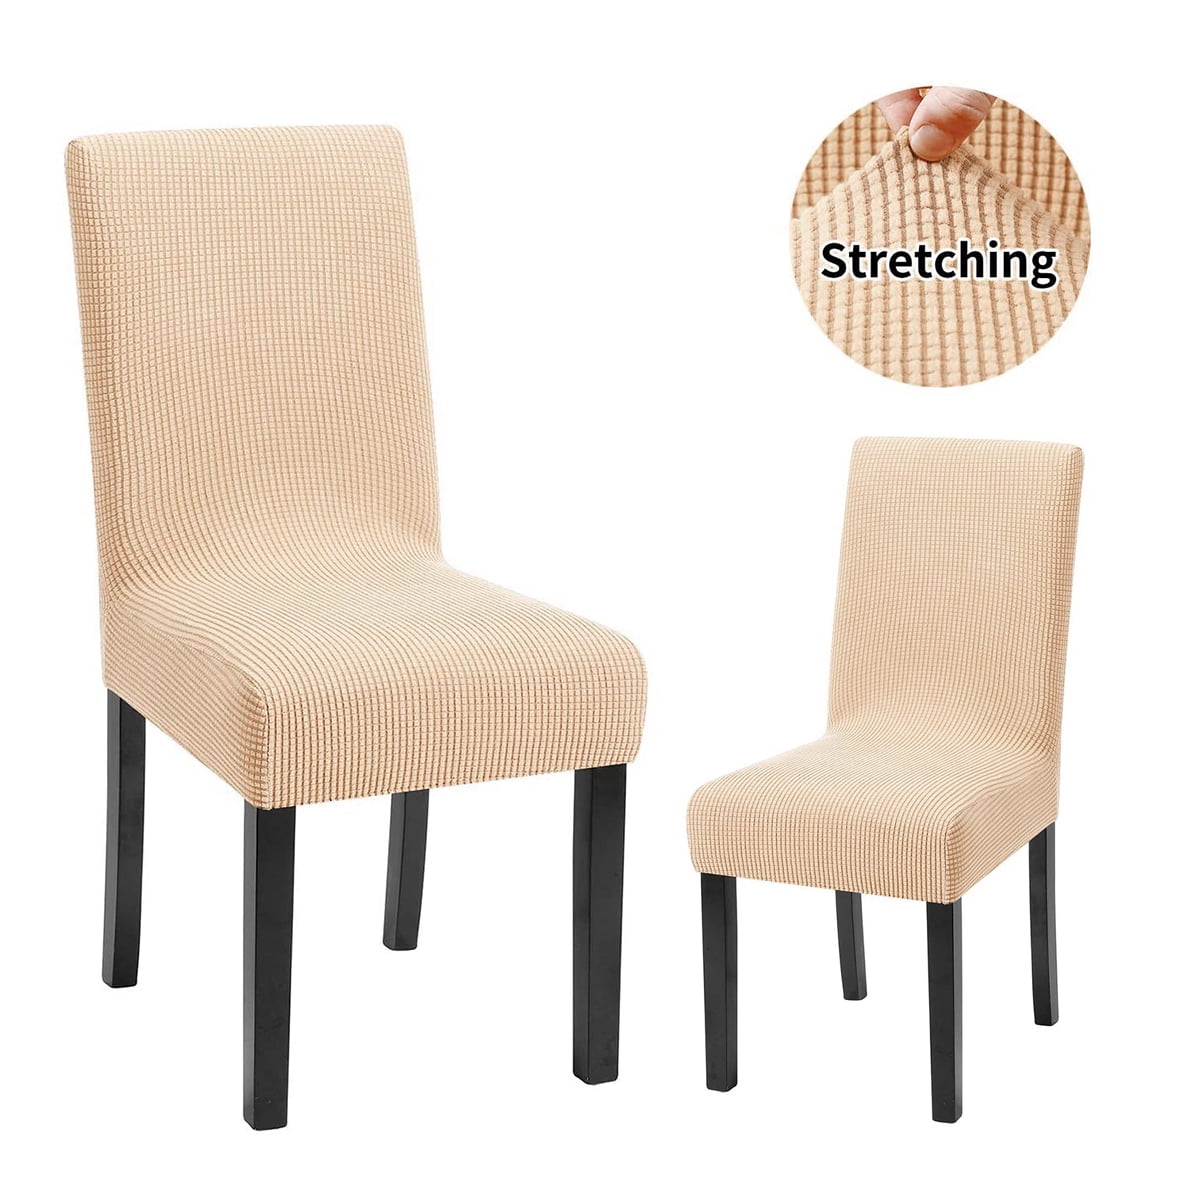 Details about   Dining Chair Seat Covers Stretch Spandex Cover Removable Wedding Protective 